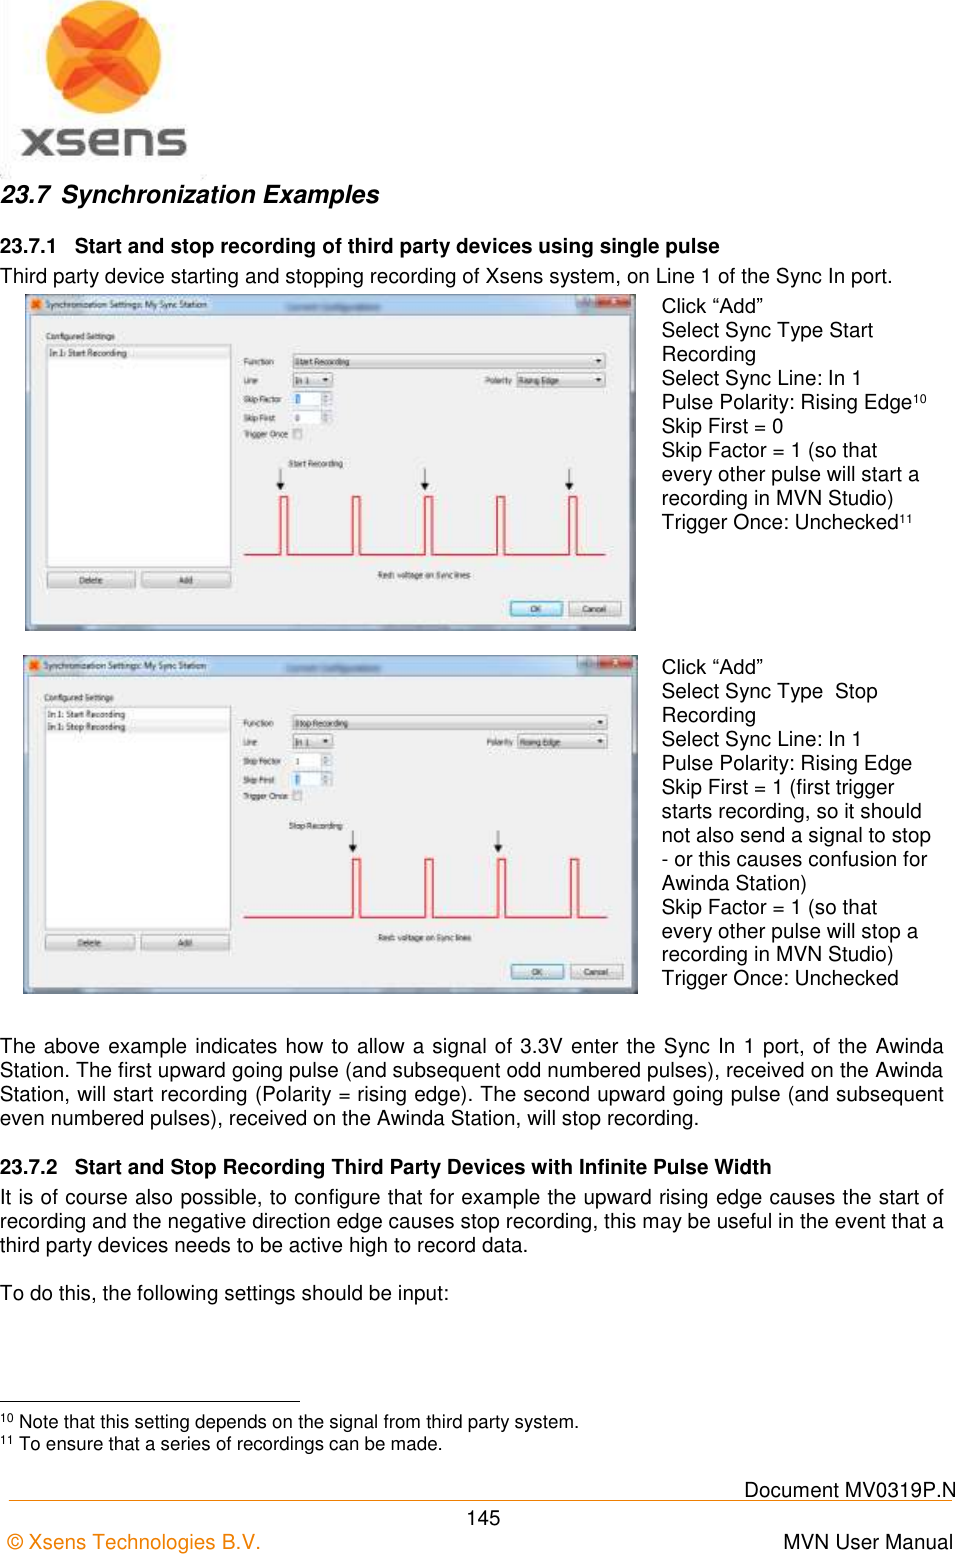    Document MV0319P.N © Xsens Technologies B.V.      MVN User Manual  145 23.7  Synchronization Examples 23.7.1  Start and stop recording of third party devices using single pulse Third party device starting and stopping recording of Xsens system, on Line 1 of the Sync In port.  Click “Add” Select Sync Type Start Recording Select Sync Line: In 1 Pulse Polarity: Rising Edge10 Skip First = 0 Skip Factor = 1 (so that every other pulse will start a recording in MVN Studio) Trigger Once: Unchecked11  Click “Add” Select Sync Type  Stop Recording Select Sync Line: In 1 Pulse Polarity: Rising Edge Skip First = 1 (first trigger starts recording, so it should not also send a signal to stop - or this causes confusion for Awinda Station) Skip Factor = 1 (so that every other pulse will stop a recording in MVN Studio) Trigger Once: Unchecked  The above example indicates how to allow a signal of 3.3V enter the Sync In 1 port, of the Awinda Station. The first upward going pulse (and subsequent odd numbered pulses), received on the Awinda Station, will start recording (Polarity = rising edge). The second upward going pulse (and subsequent even numbered pulses), received on the Awinda Station, will stop recording. 23.7.2  Start and Stop Recording Third Party Devices with Infinite Pulse Width It is of course also possible, to configure that for example the upward rising edge causes the start of recording and the negative direction edge causes stop recording, this may be useful in the event that a third party devices needs to be active high to record data.  To do this, the following settings should be input:                                                       10 Note that this setting depends on the signal from third party system. 11 To ensure that a series of recordings can be made. 